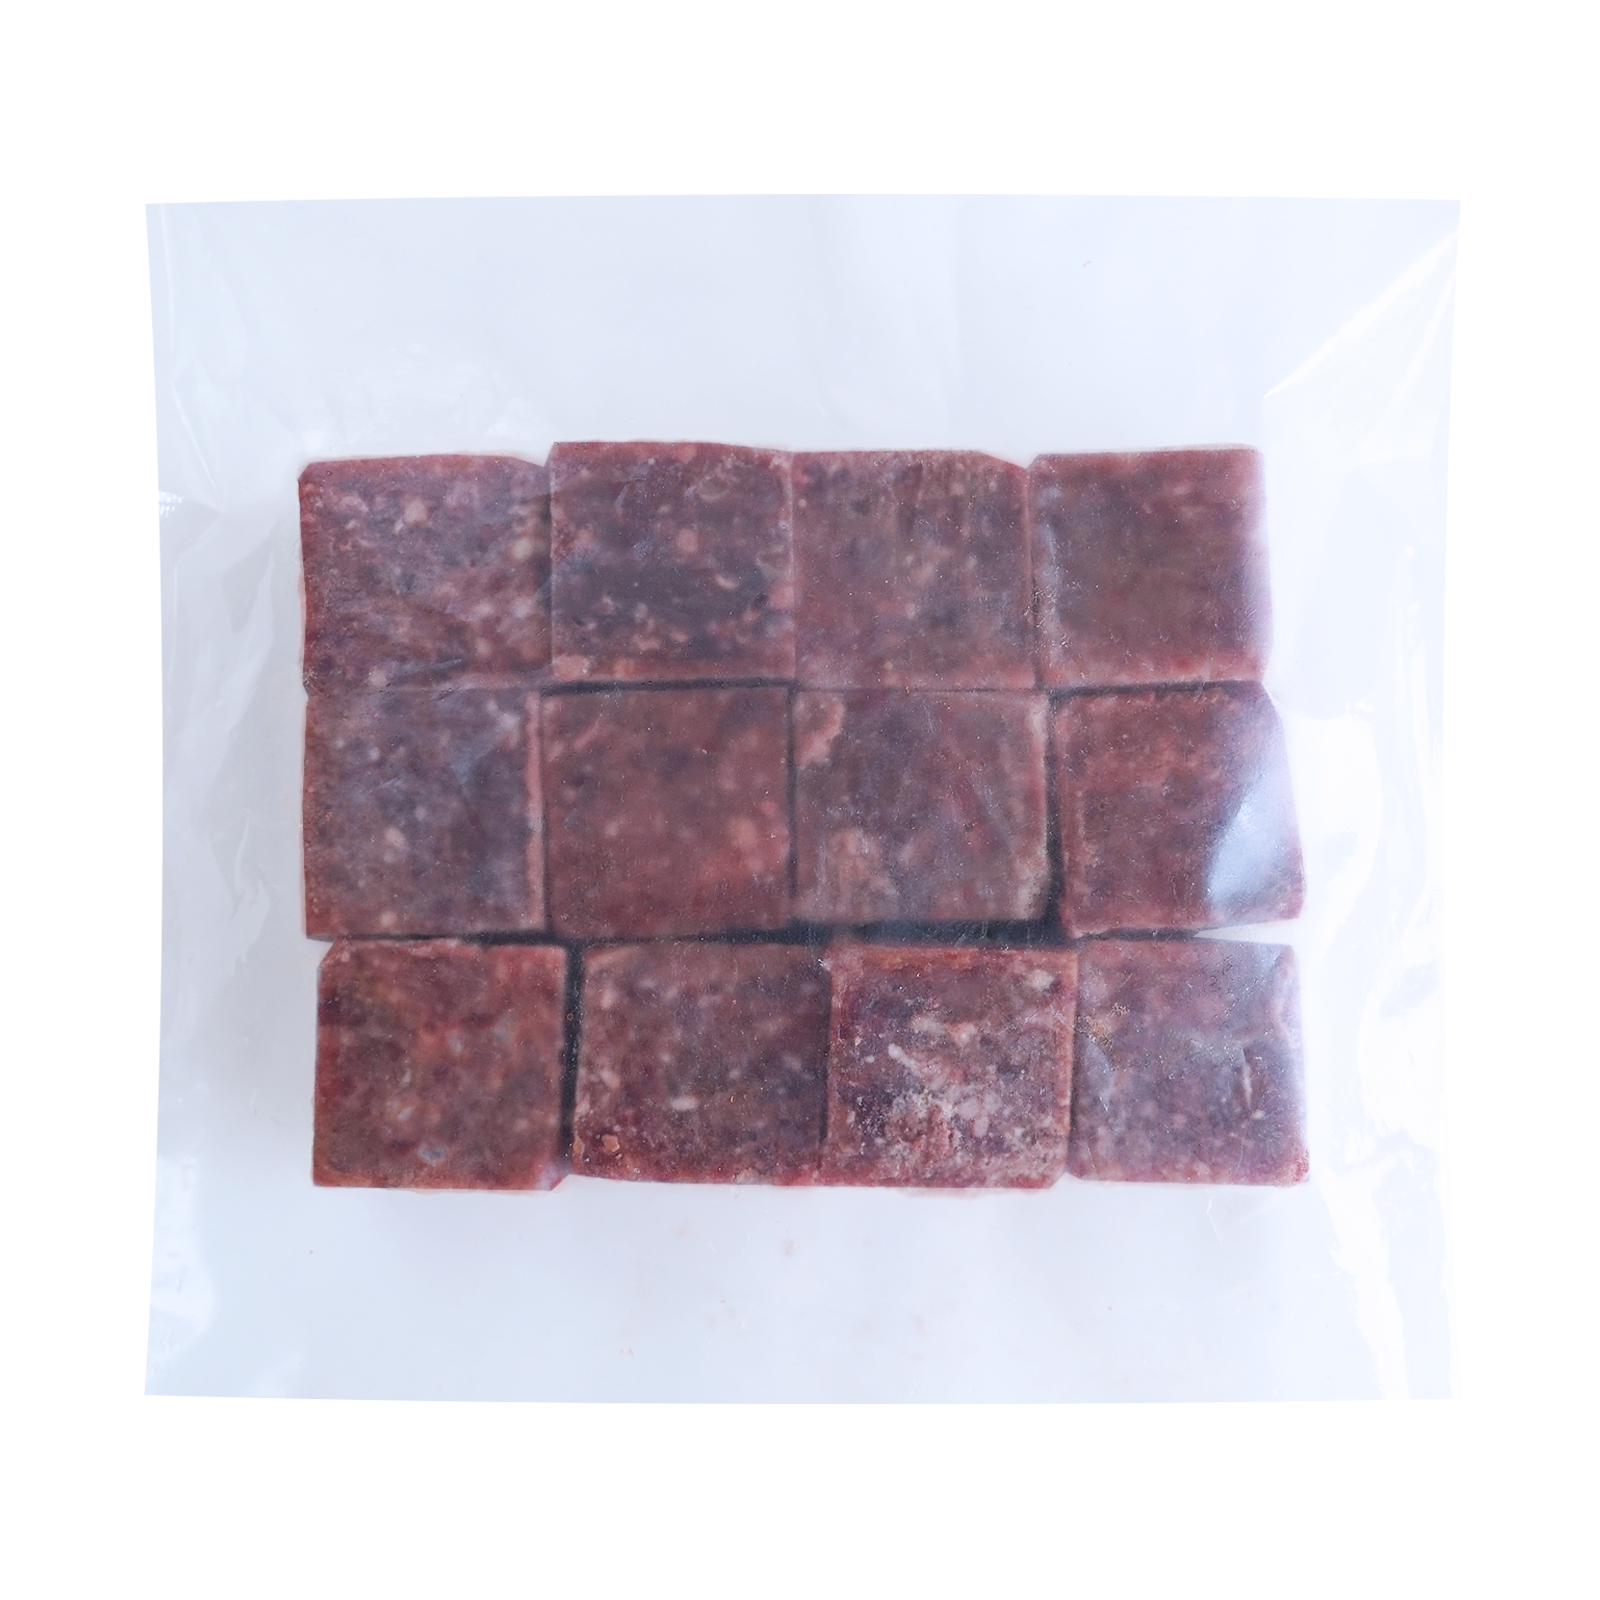 Grass-Fed Beef Liver Mince Portioned Cubes from Australia (300g) - Horizon Farms